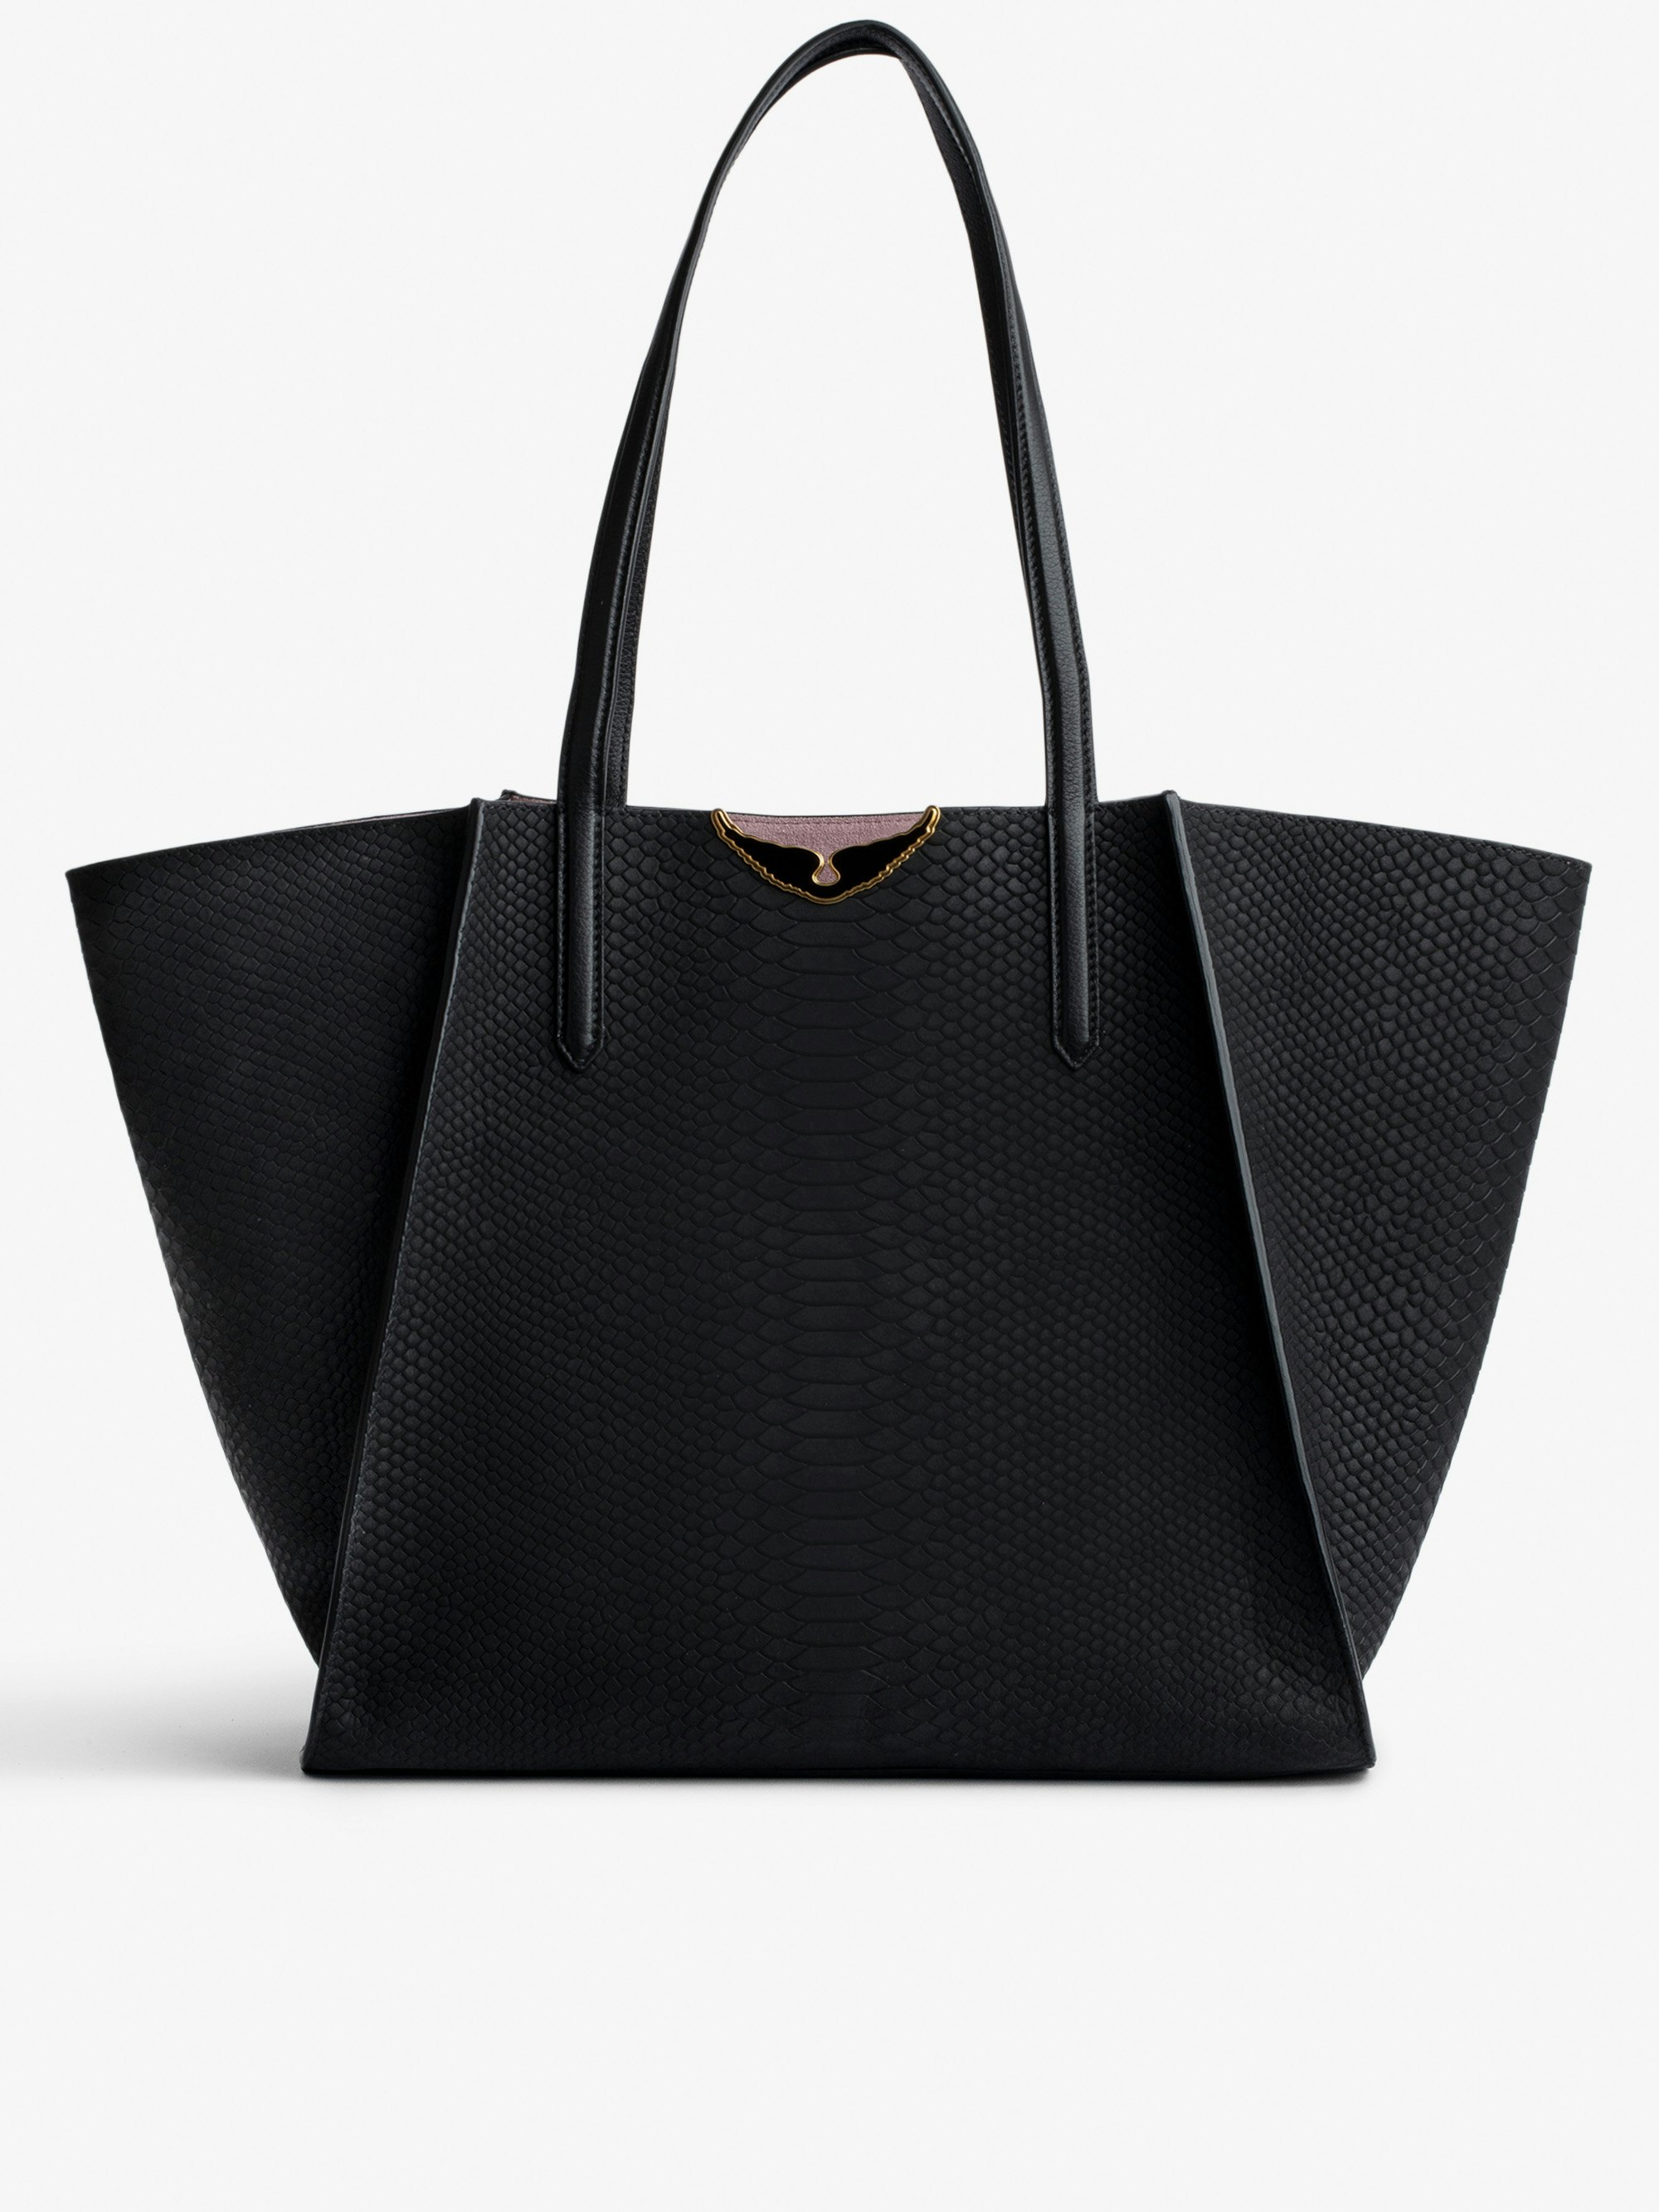 Le Borderline Soft Savage Bag - Women's reversible tote bag in black python-effect leather and pink suede with black lacquered wings.